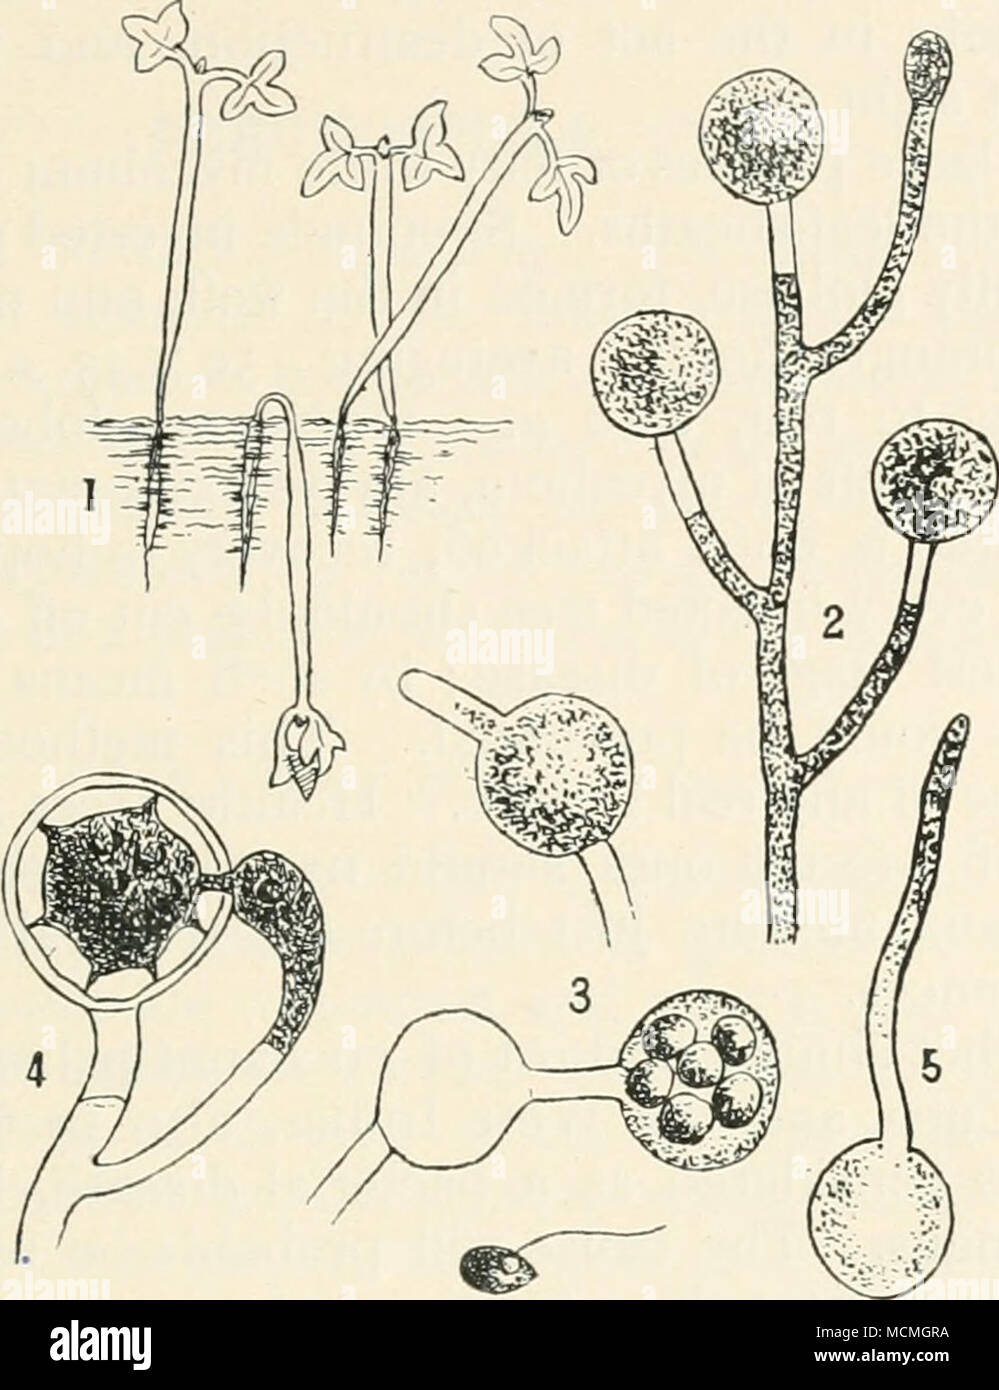 FiG. 22,.—Pythium de baryanum. i, seedlings of cress [Le- pidizim sativutn)  attacked by the fungus ; 2, mycelium bearing conidia at the tips of the  branches ; 3, sporangia in different